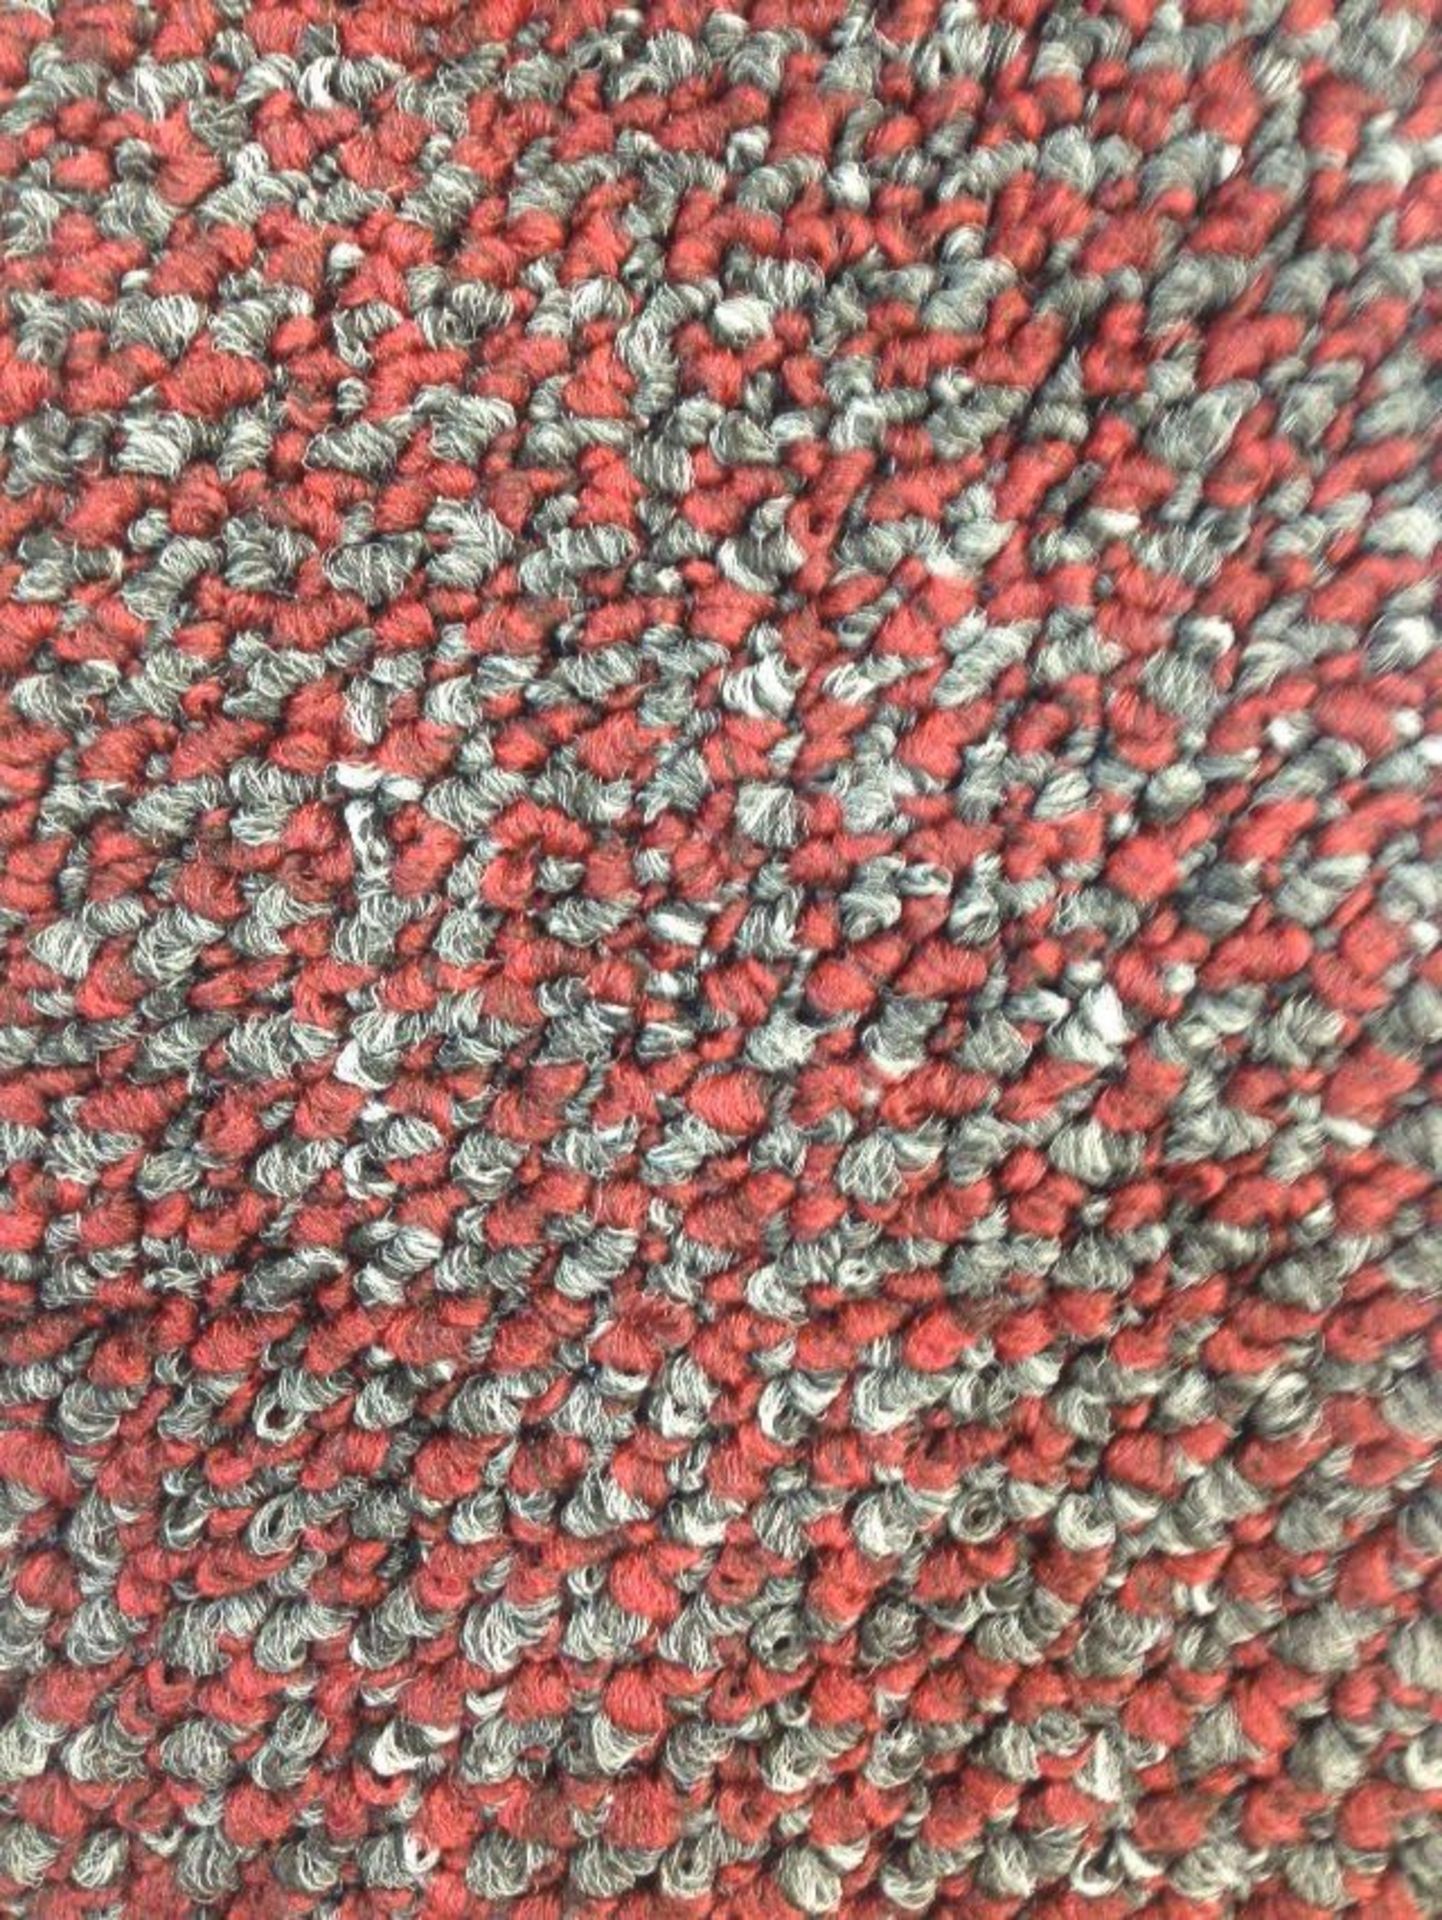 Landlords Special Heavy Domestic Budget Carpeting - Red 17.5m x 4m - Total 70m2